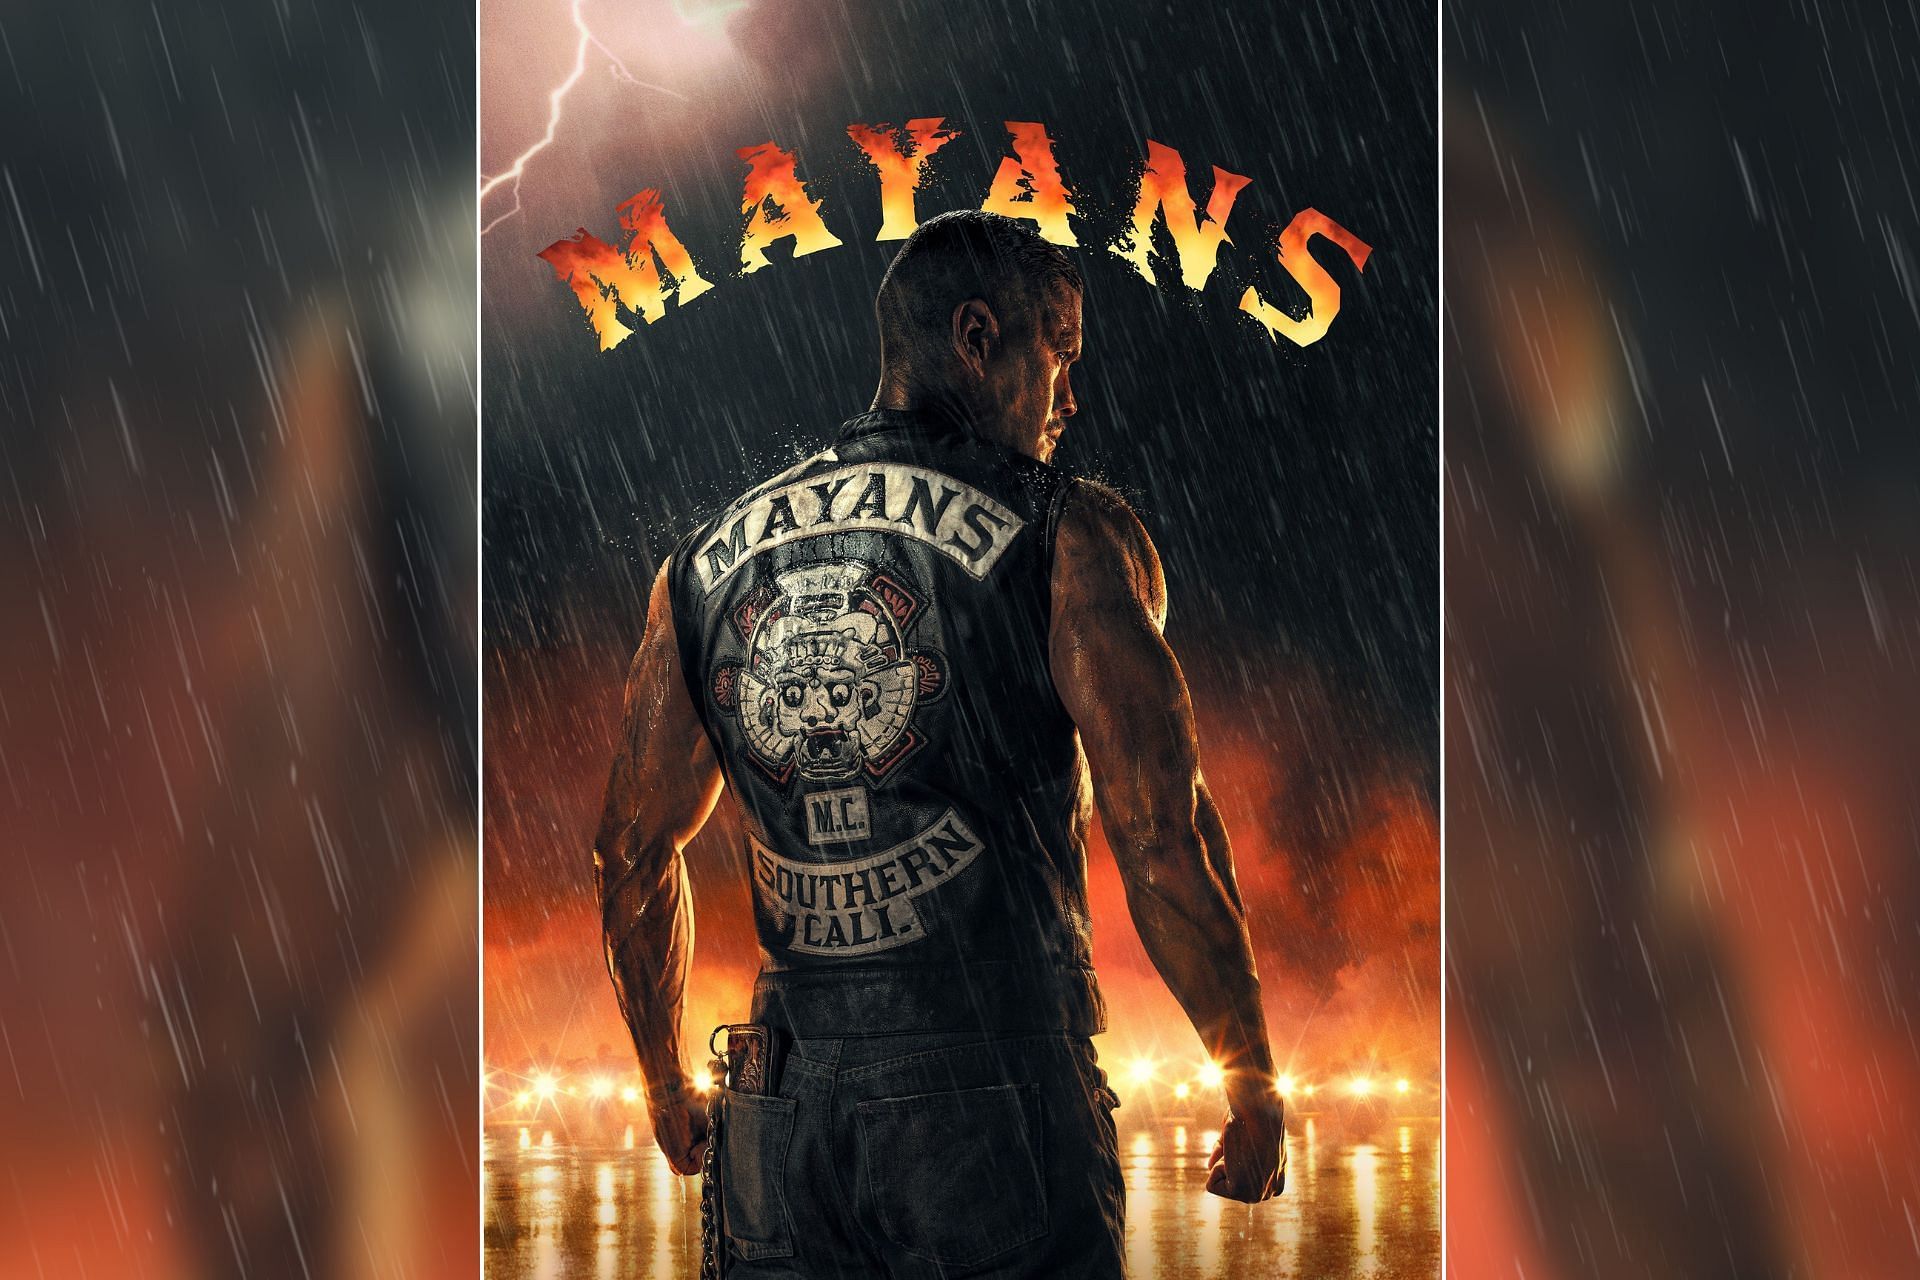 Season 5 of Mayans M.C. will be the show